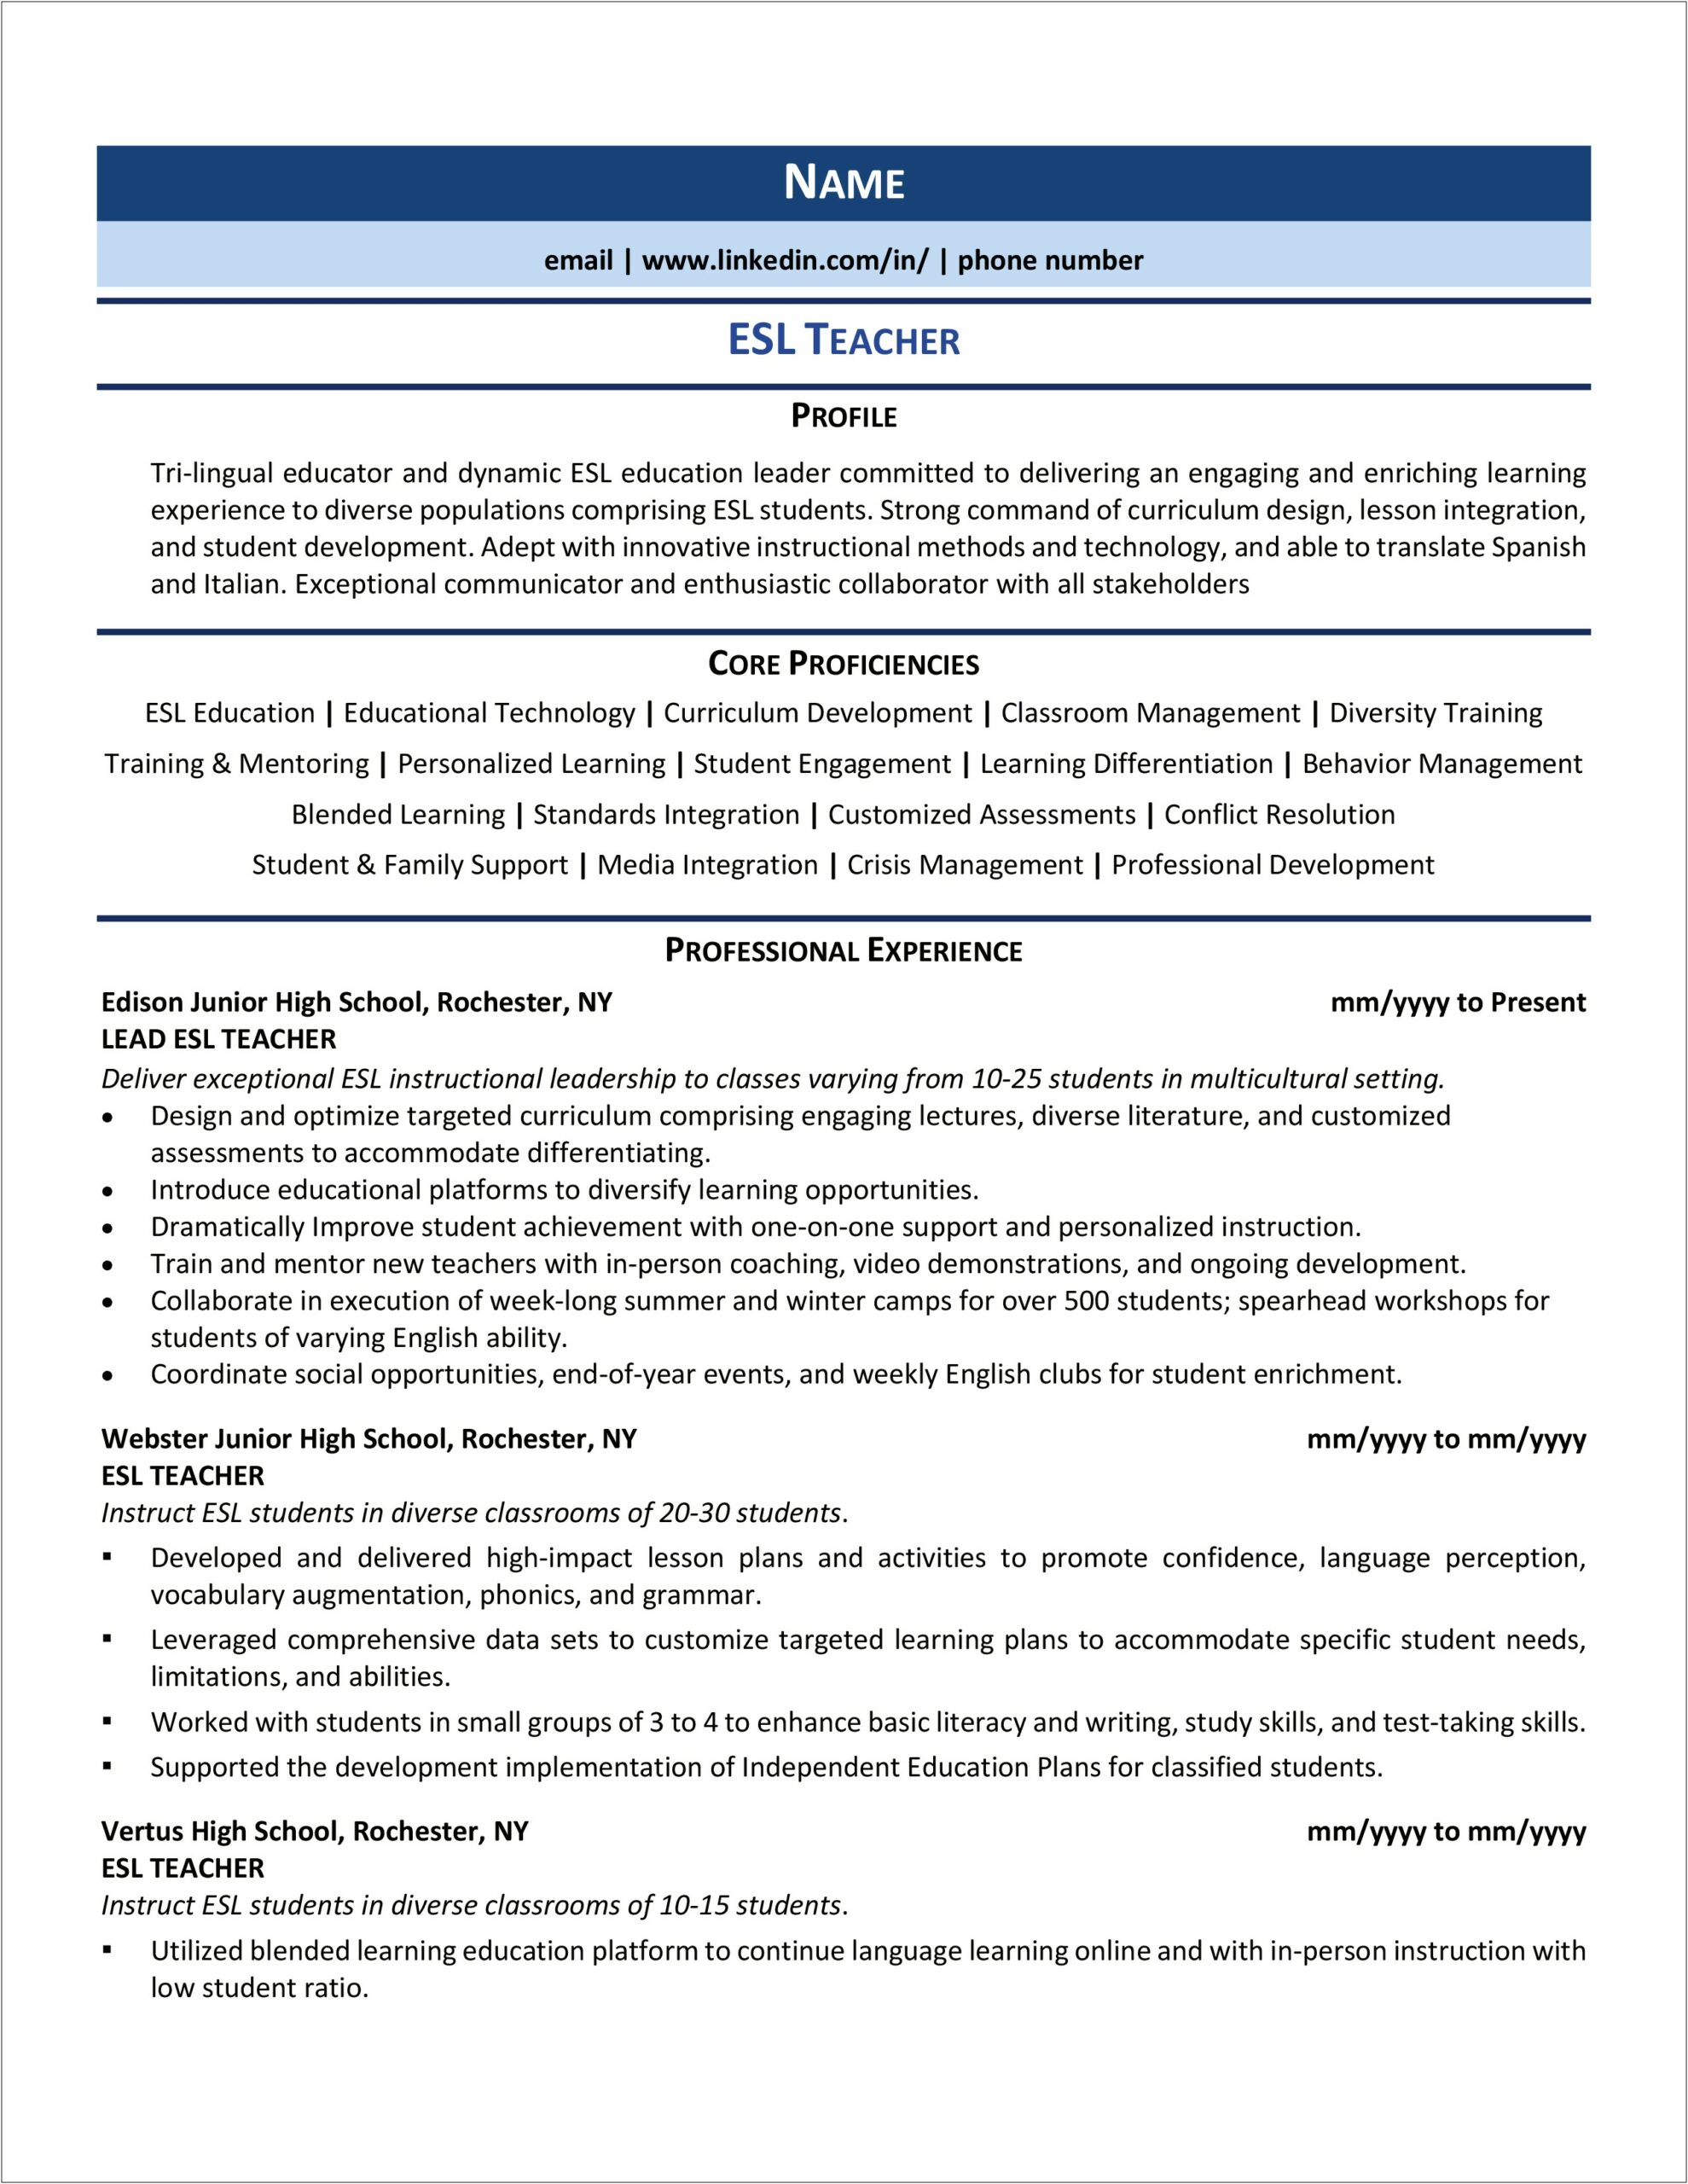 Diversity And Corporate Communications Professional Resume Sample